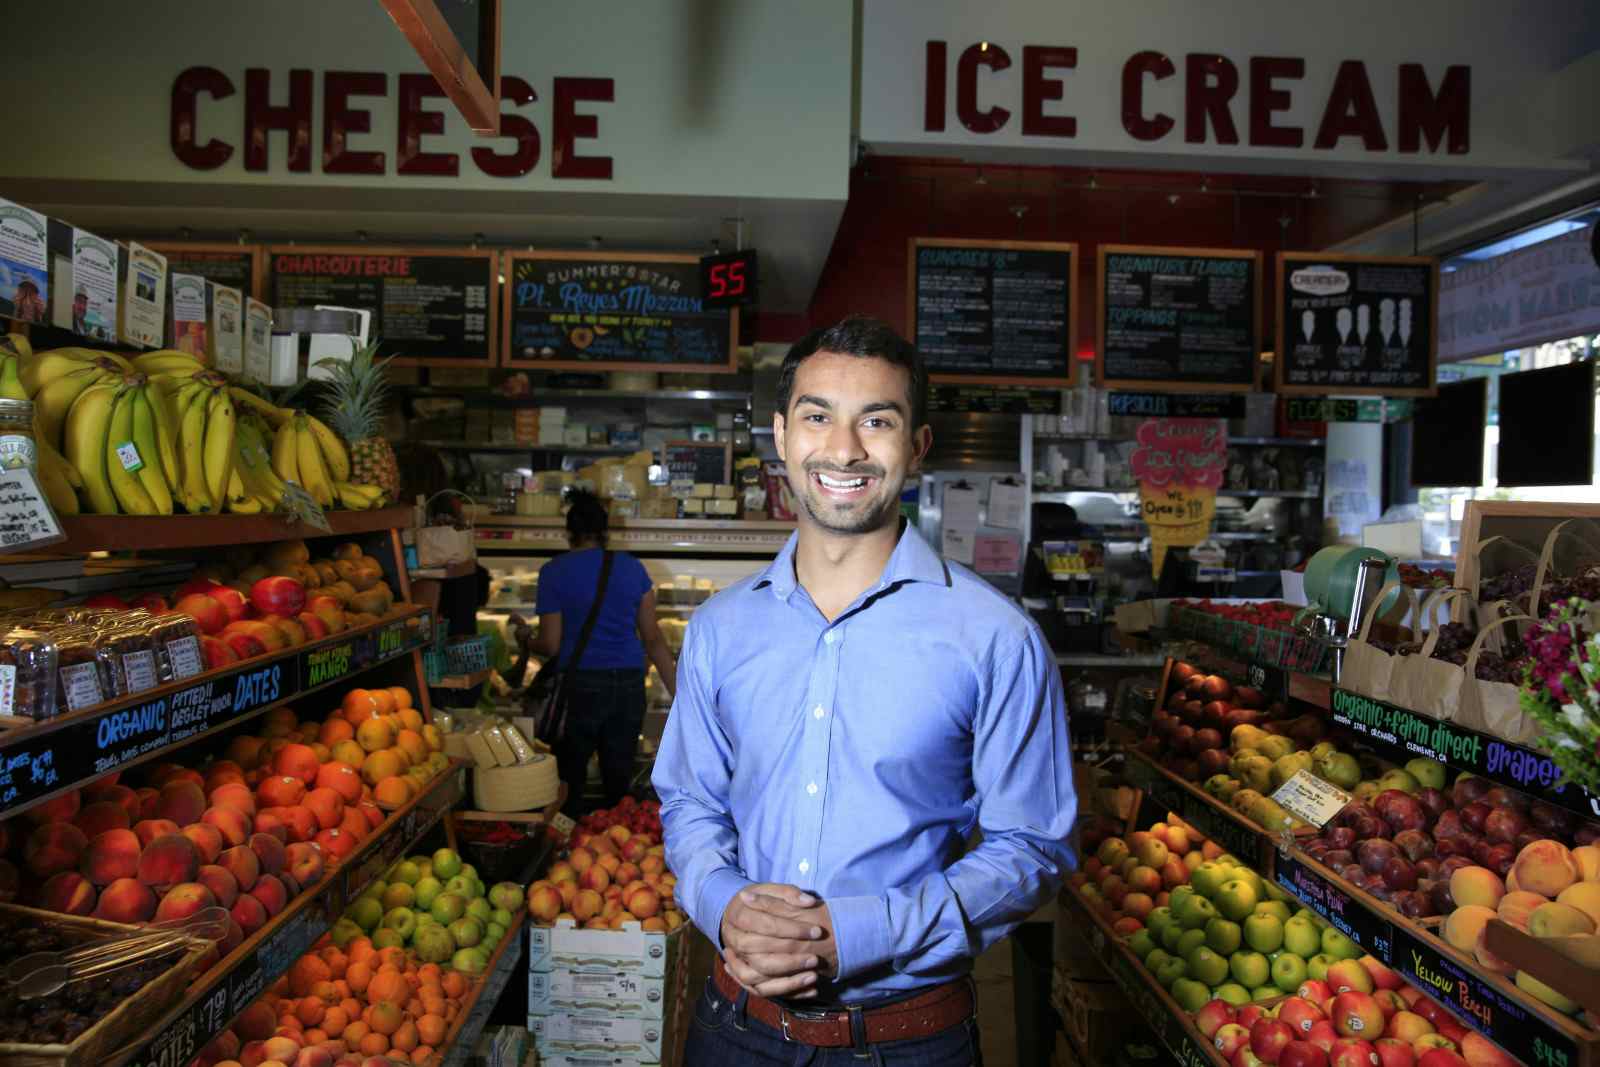 Instacart founder and CEO Apoorva Mehta, stands in the Bi-Rite Market on Divisadero Street on Thursday, July 24, 2014 in San Francisco (Lea Suzuki/The San Francisco Chronicle via Getty Images)